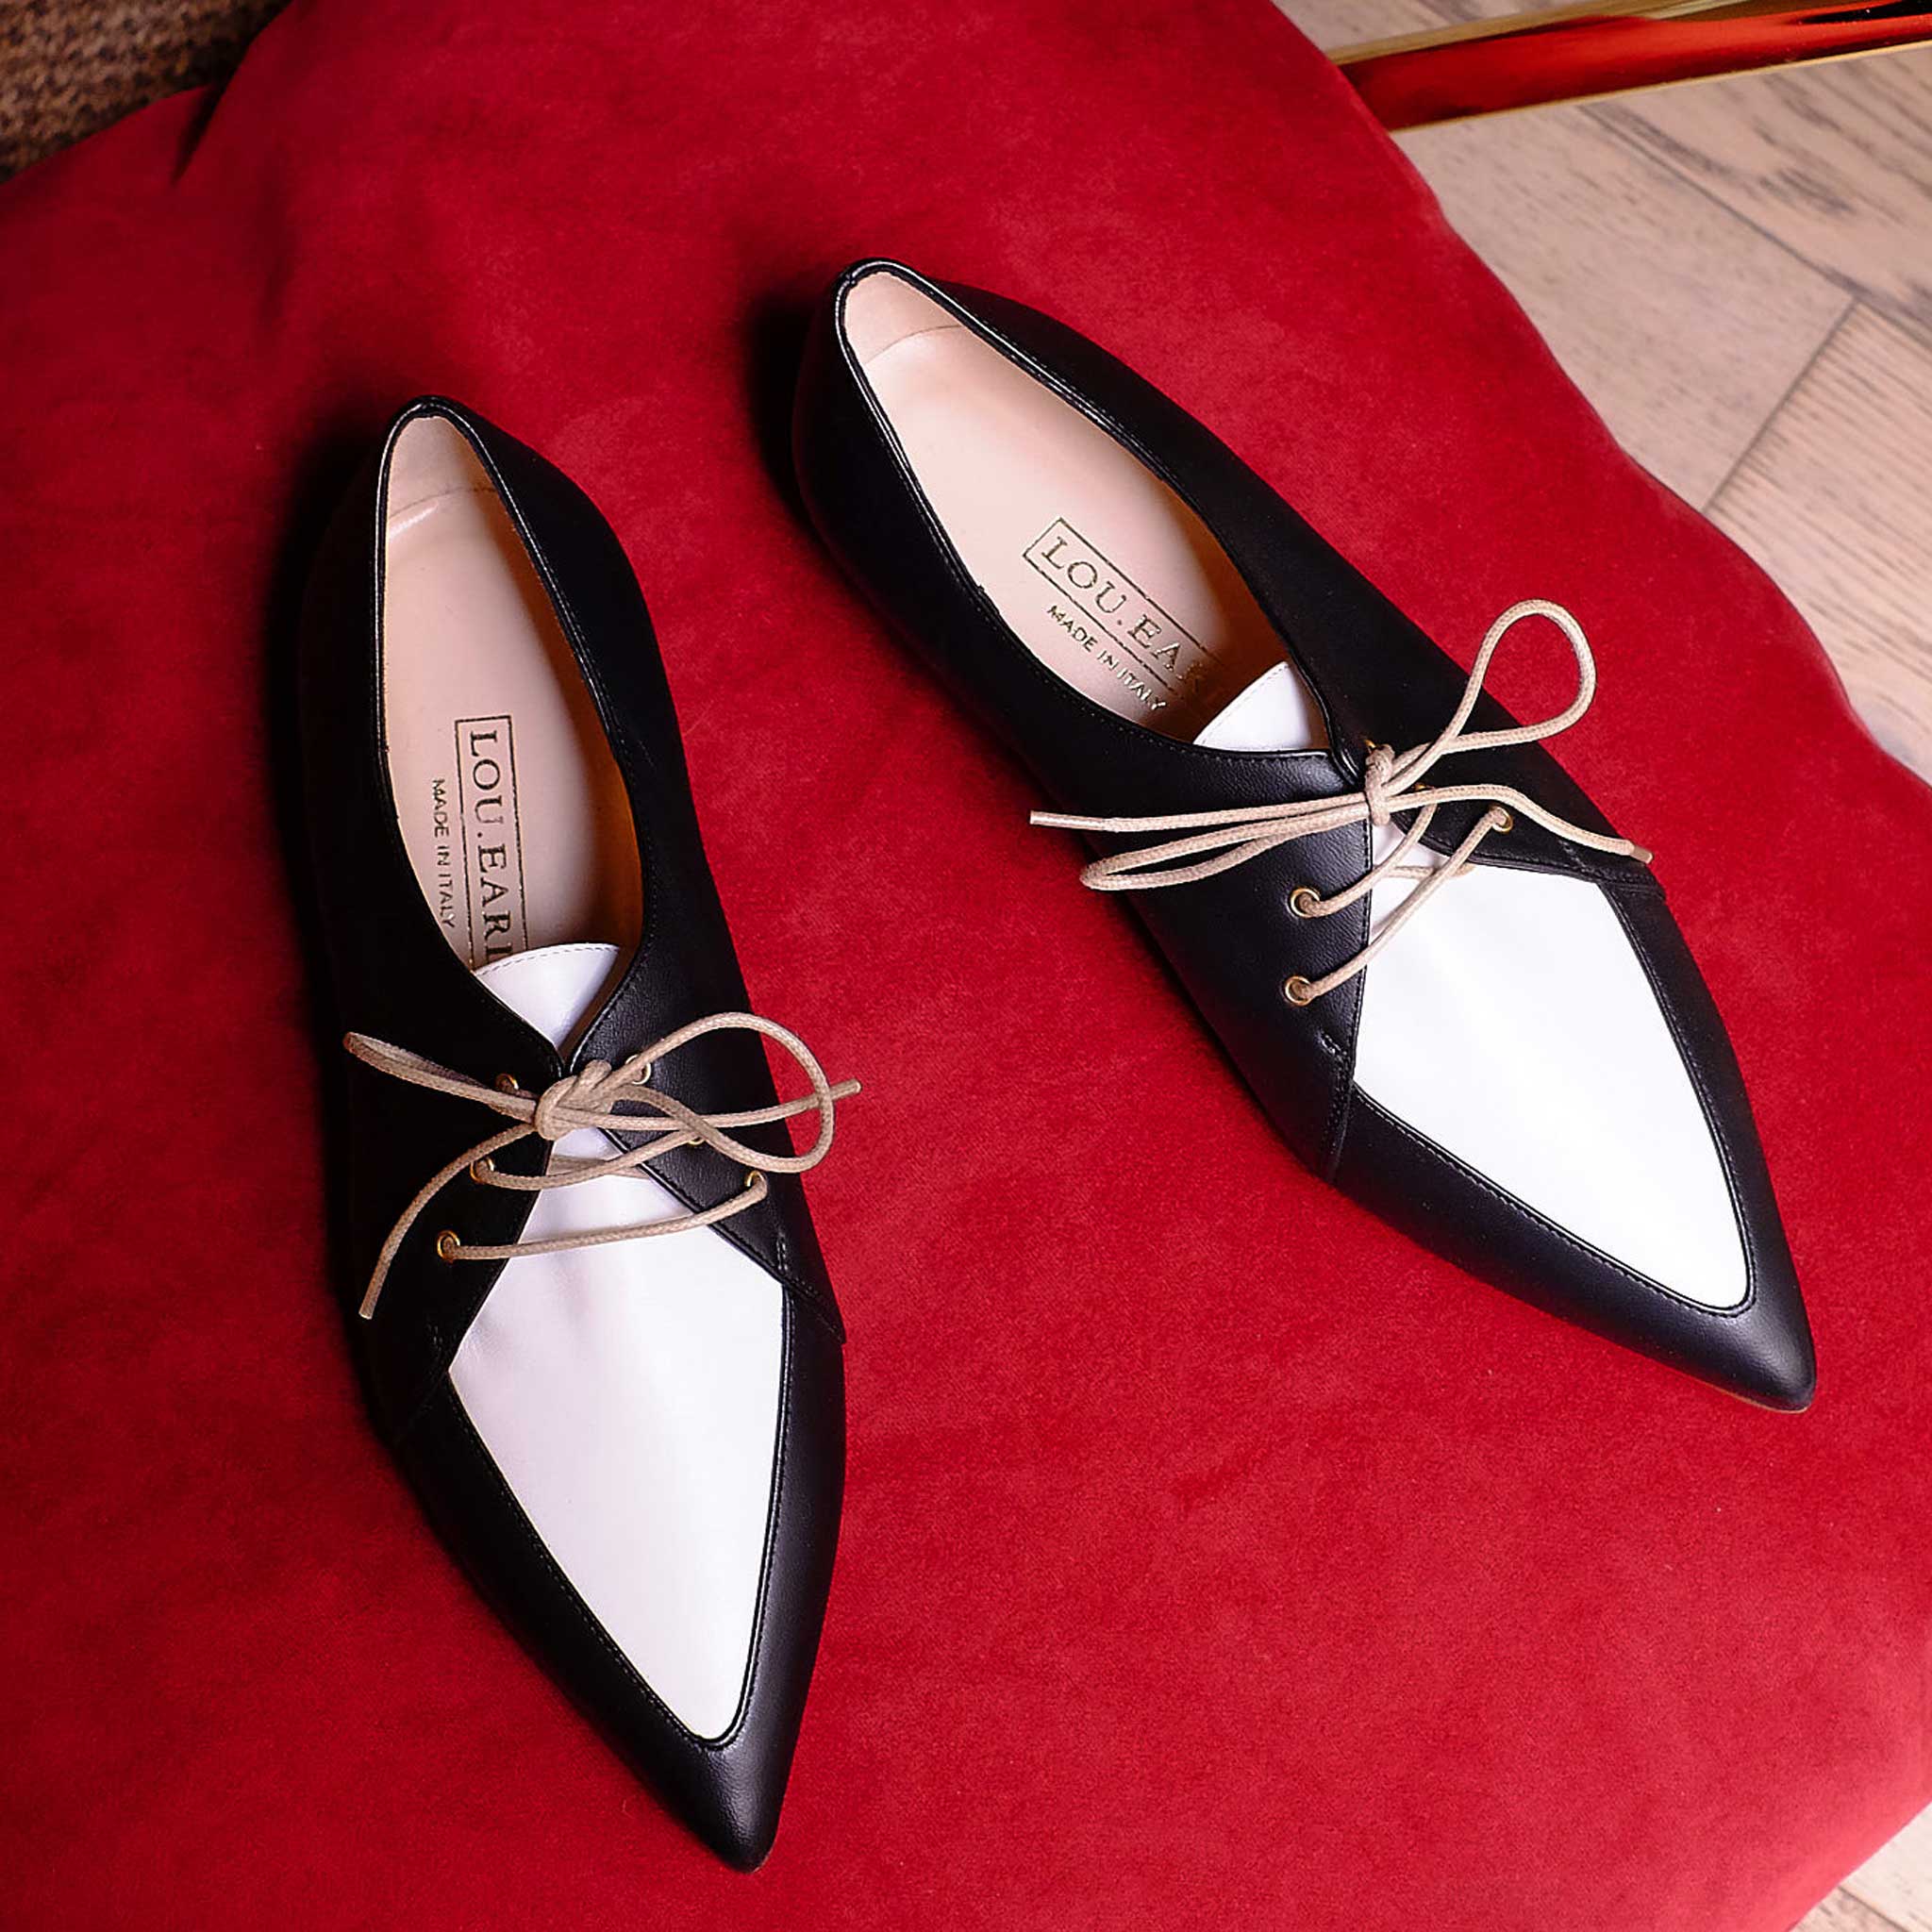 black and white spectator shoes for women with a pointy toe for women